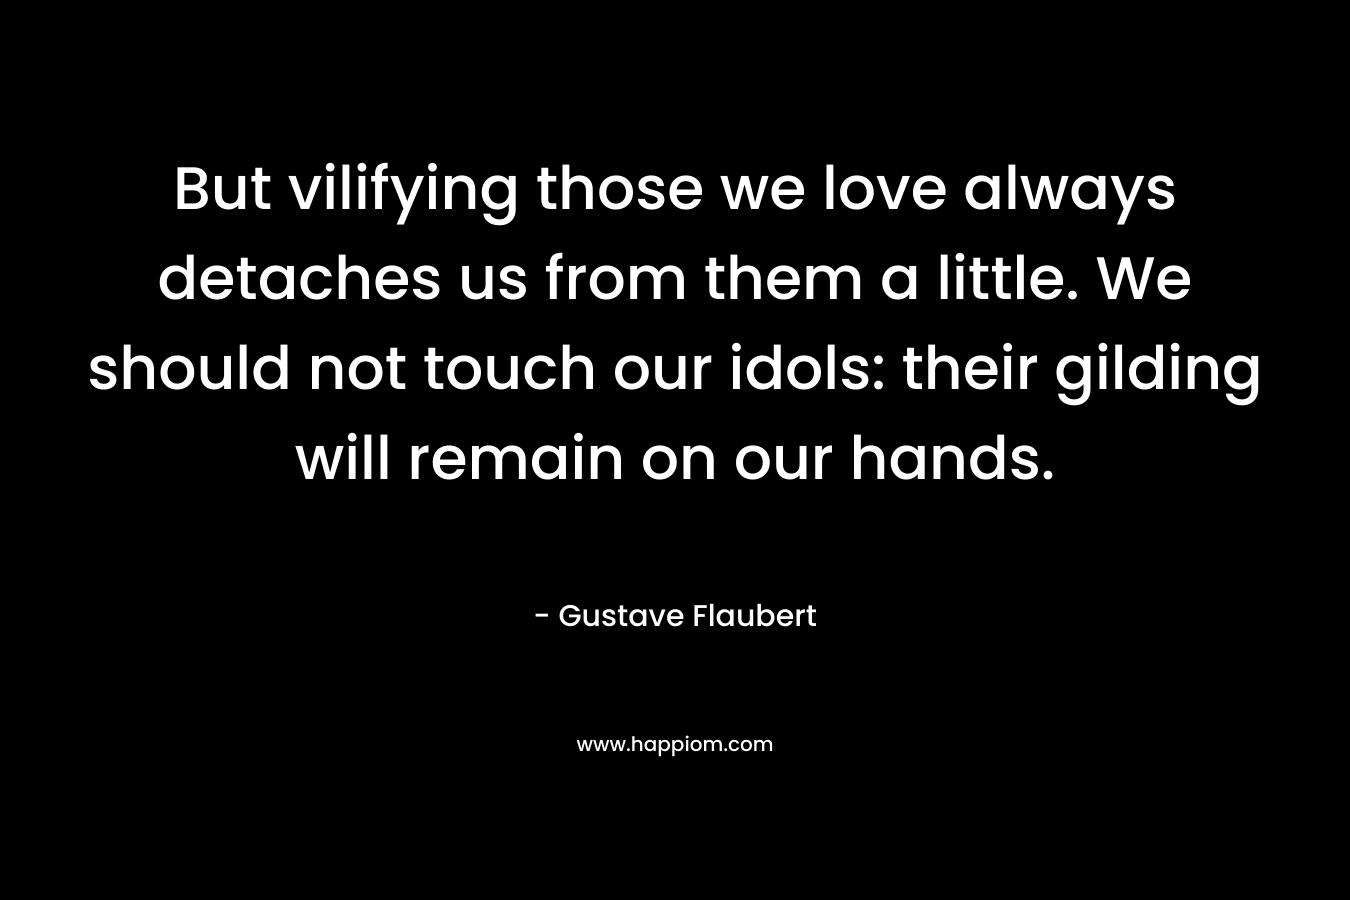 But vilifying those we love always detaches us from them a little. We should not touch our idols: their gilding will remain on our hands. – Gustave Flaubert